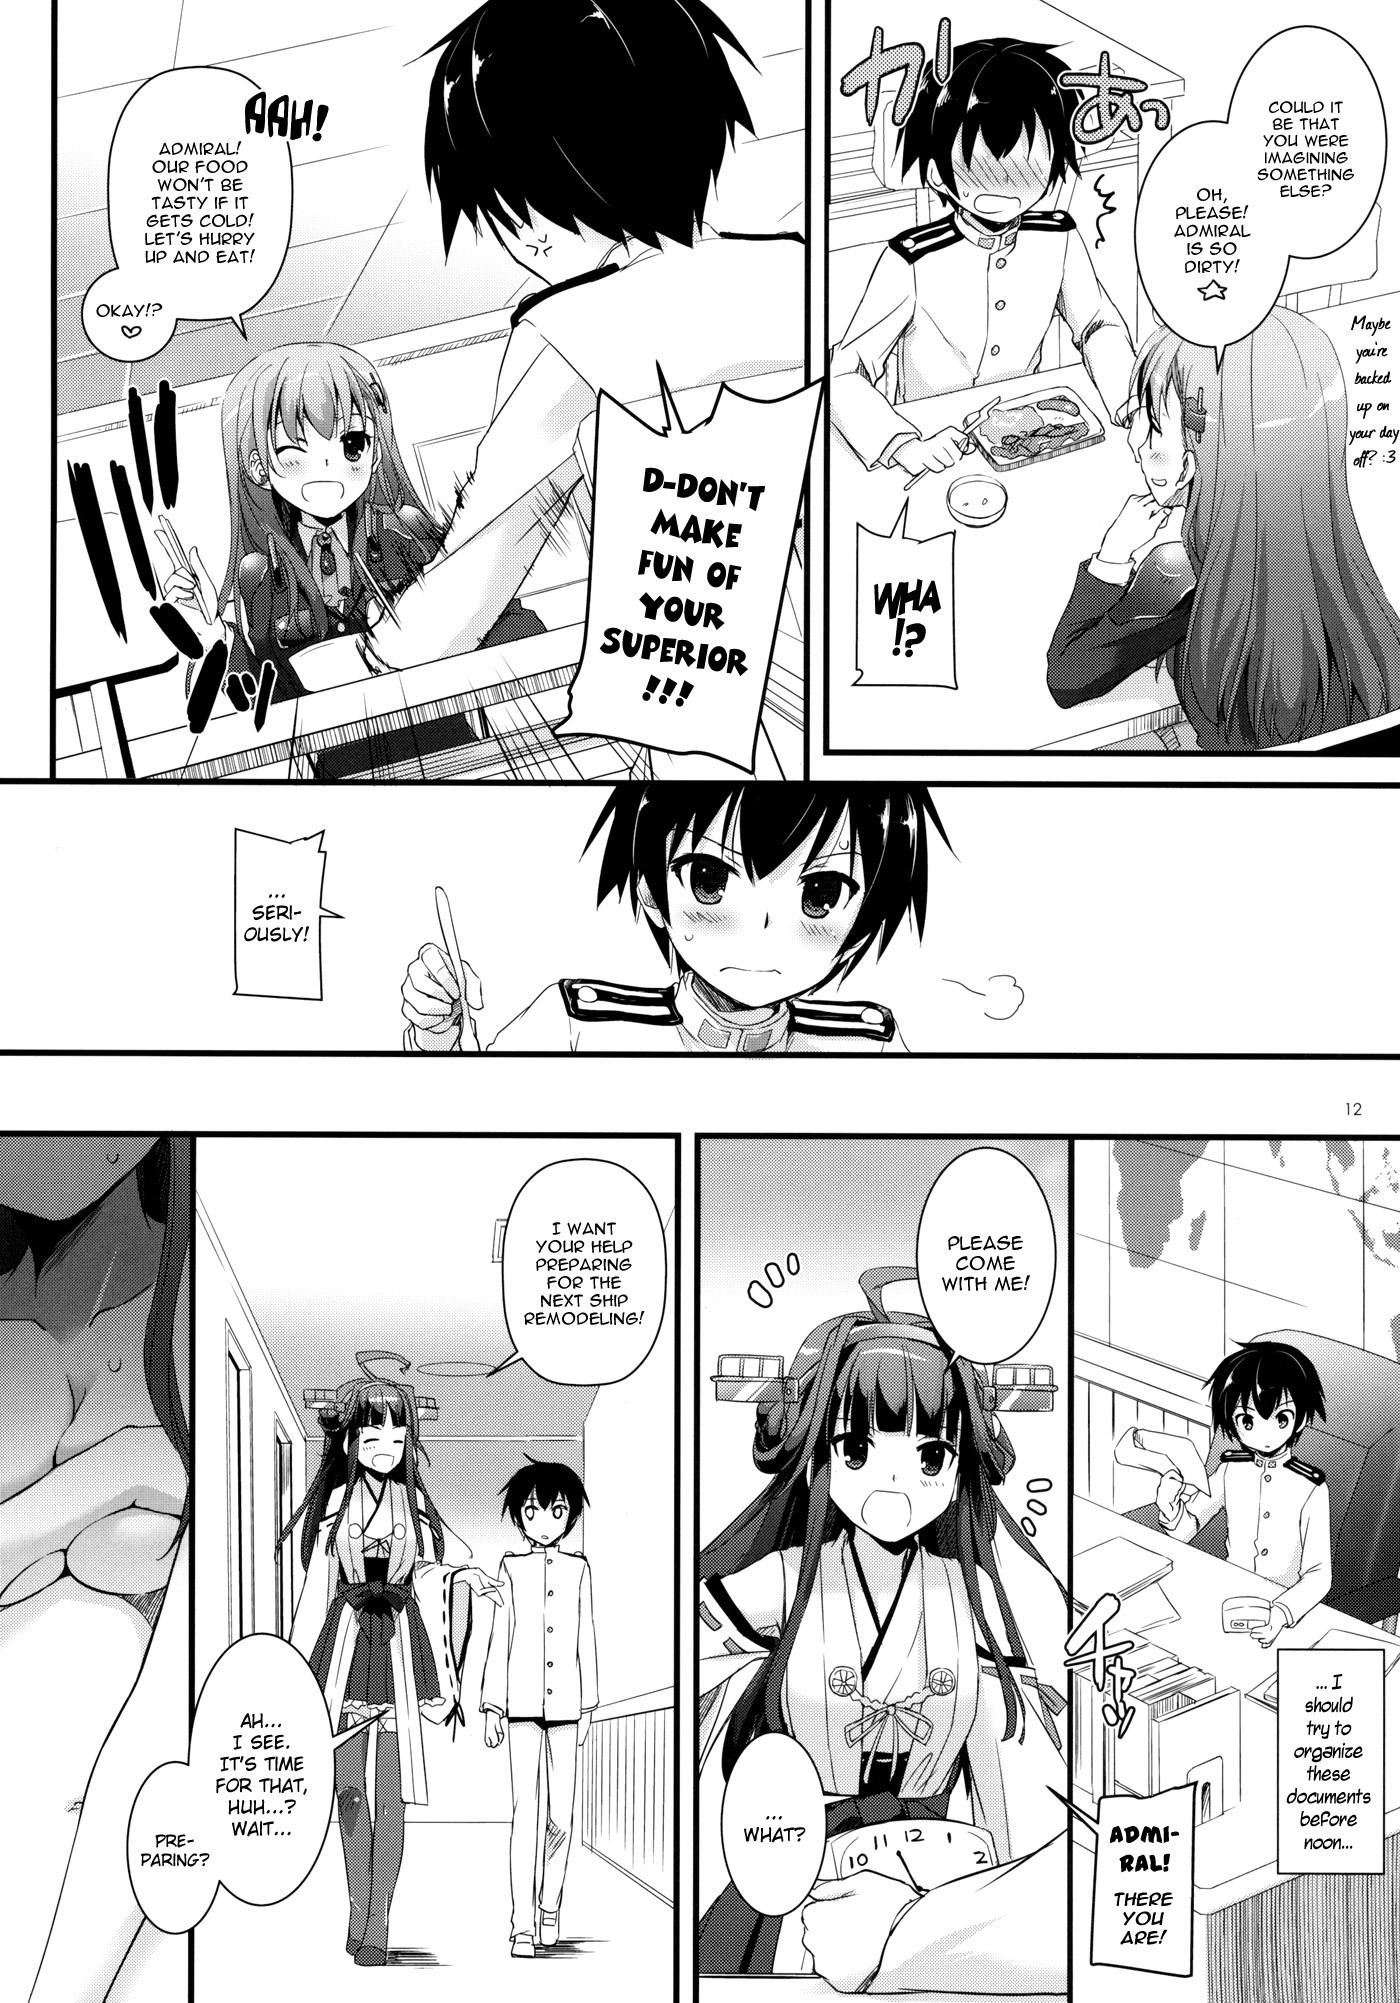 D.L. action 85 hentai manga picture 11